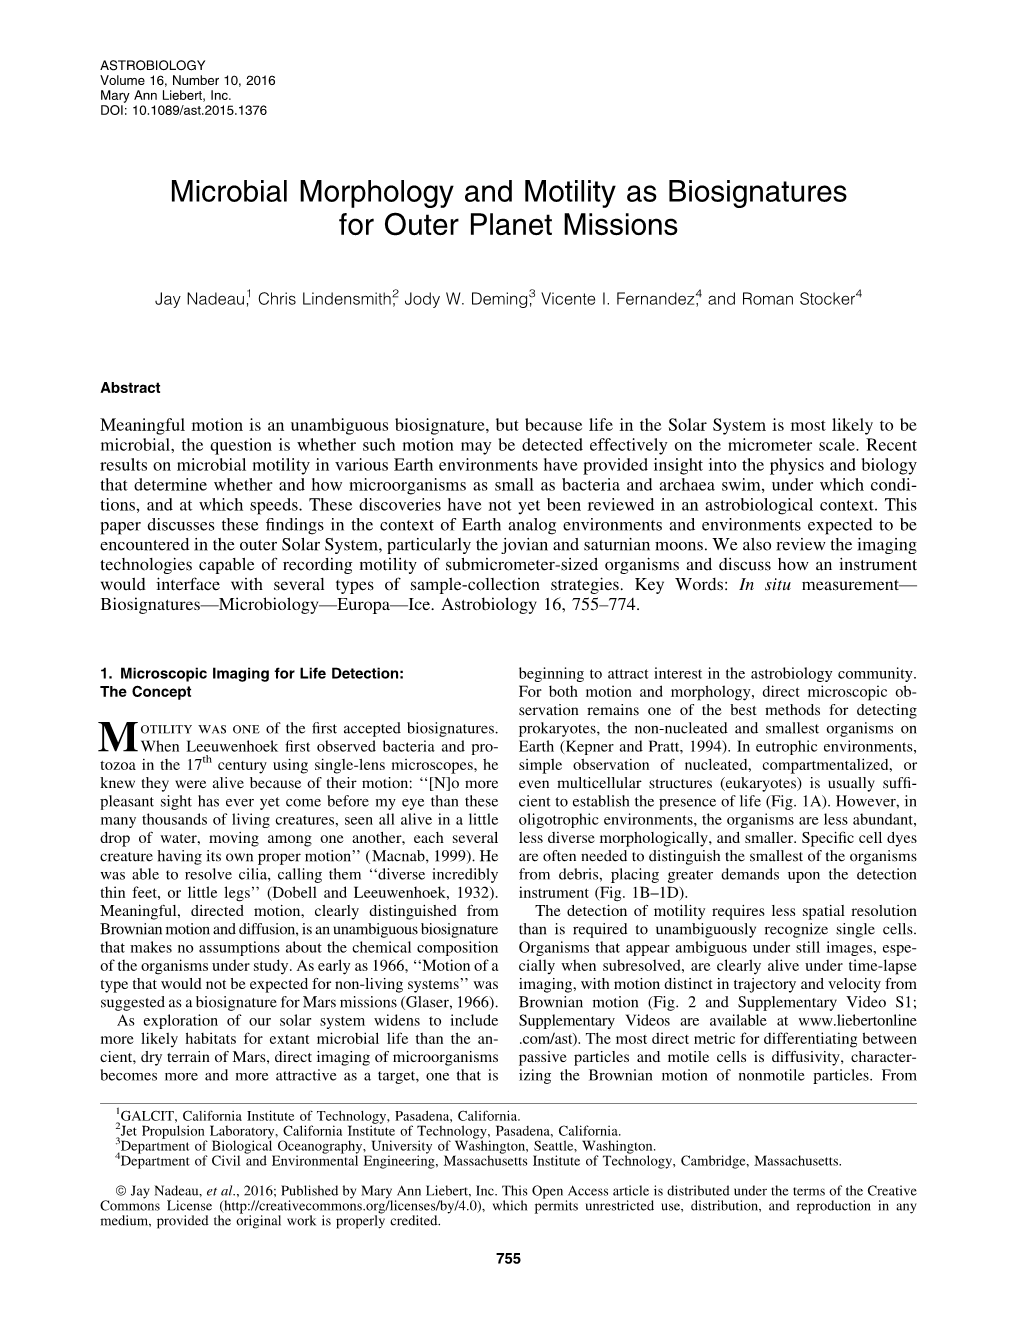 Microbial Morphology and Motility As Biosignatures for Outer Planet Missions